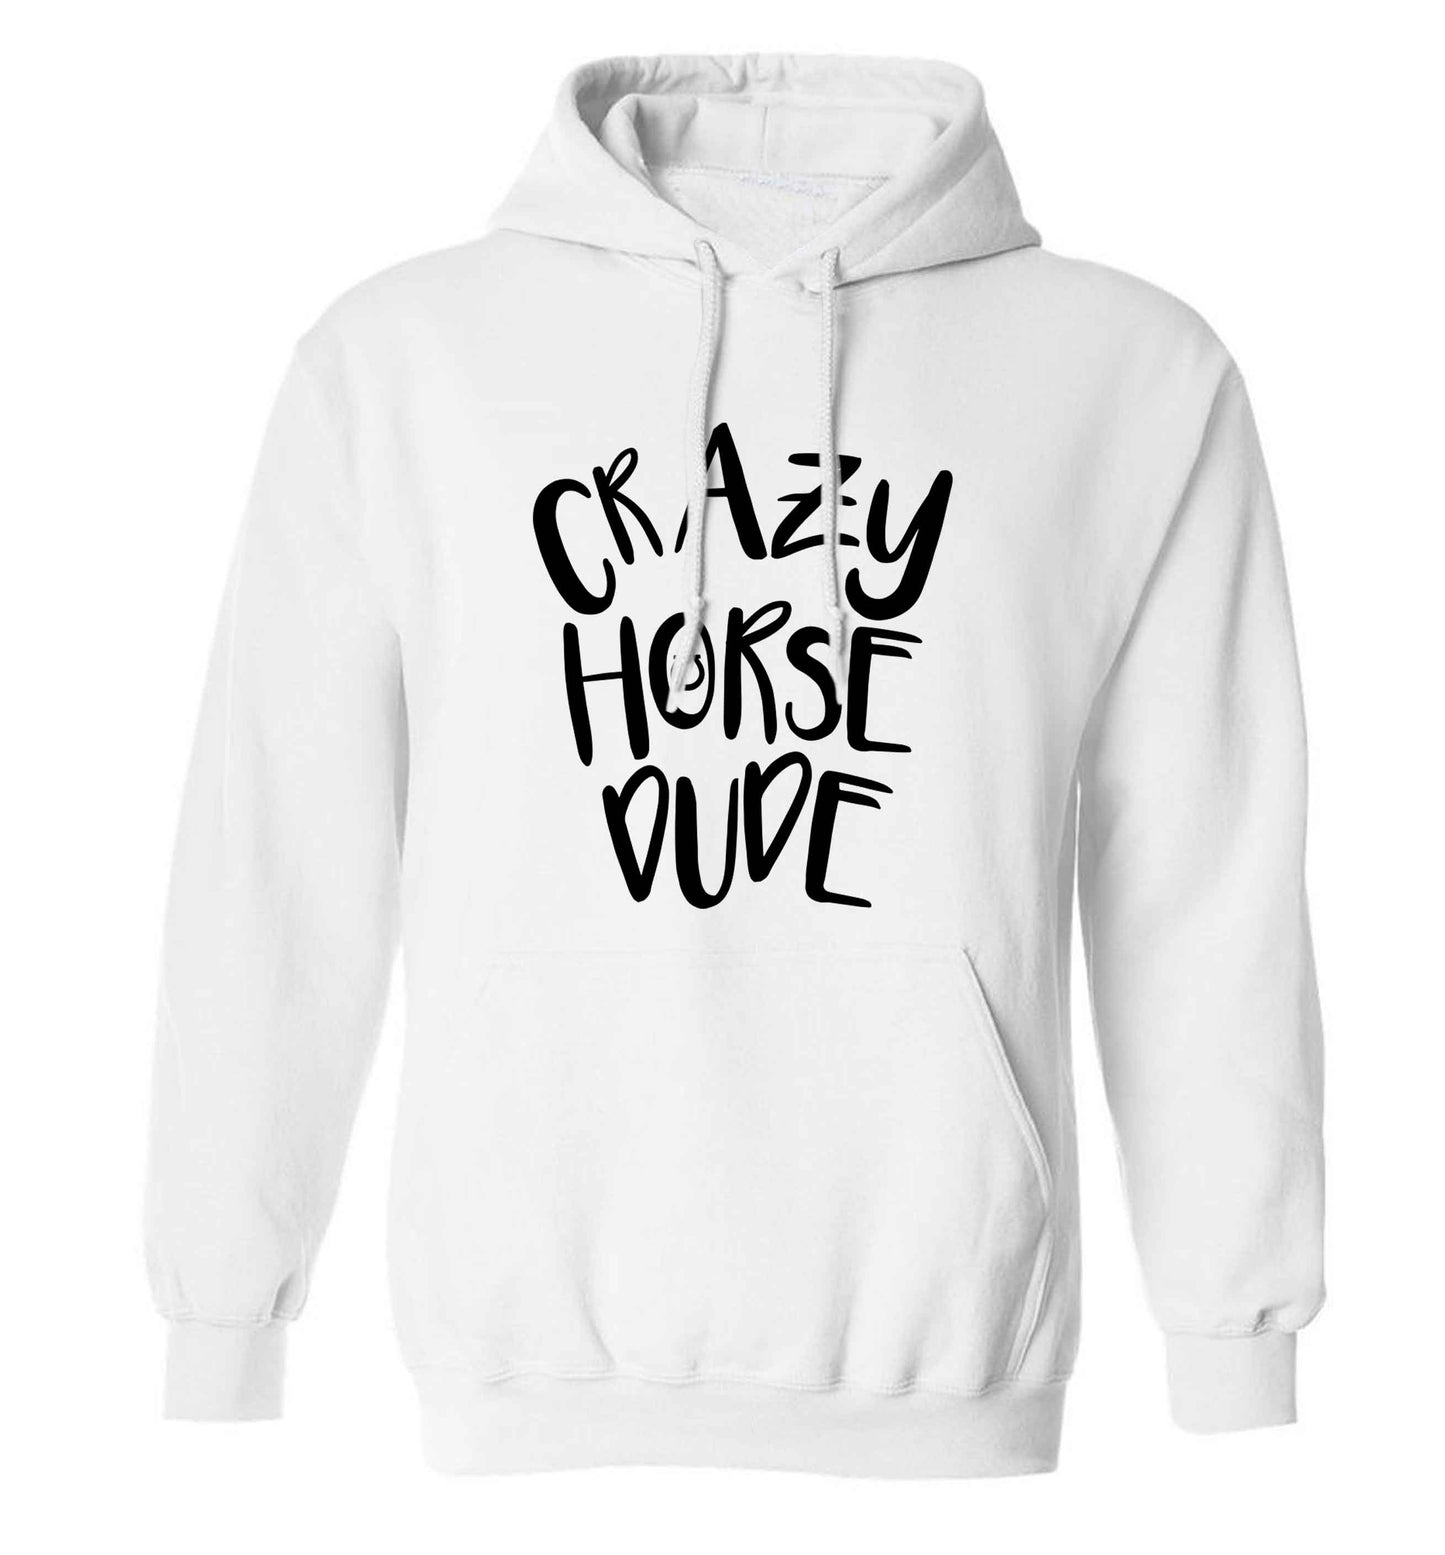 Crazy horse dude adults unisex white hoodie 2XL